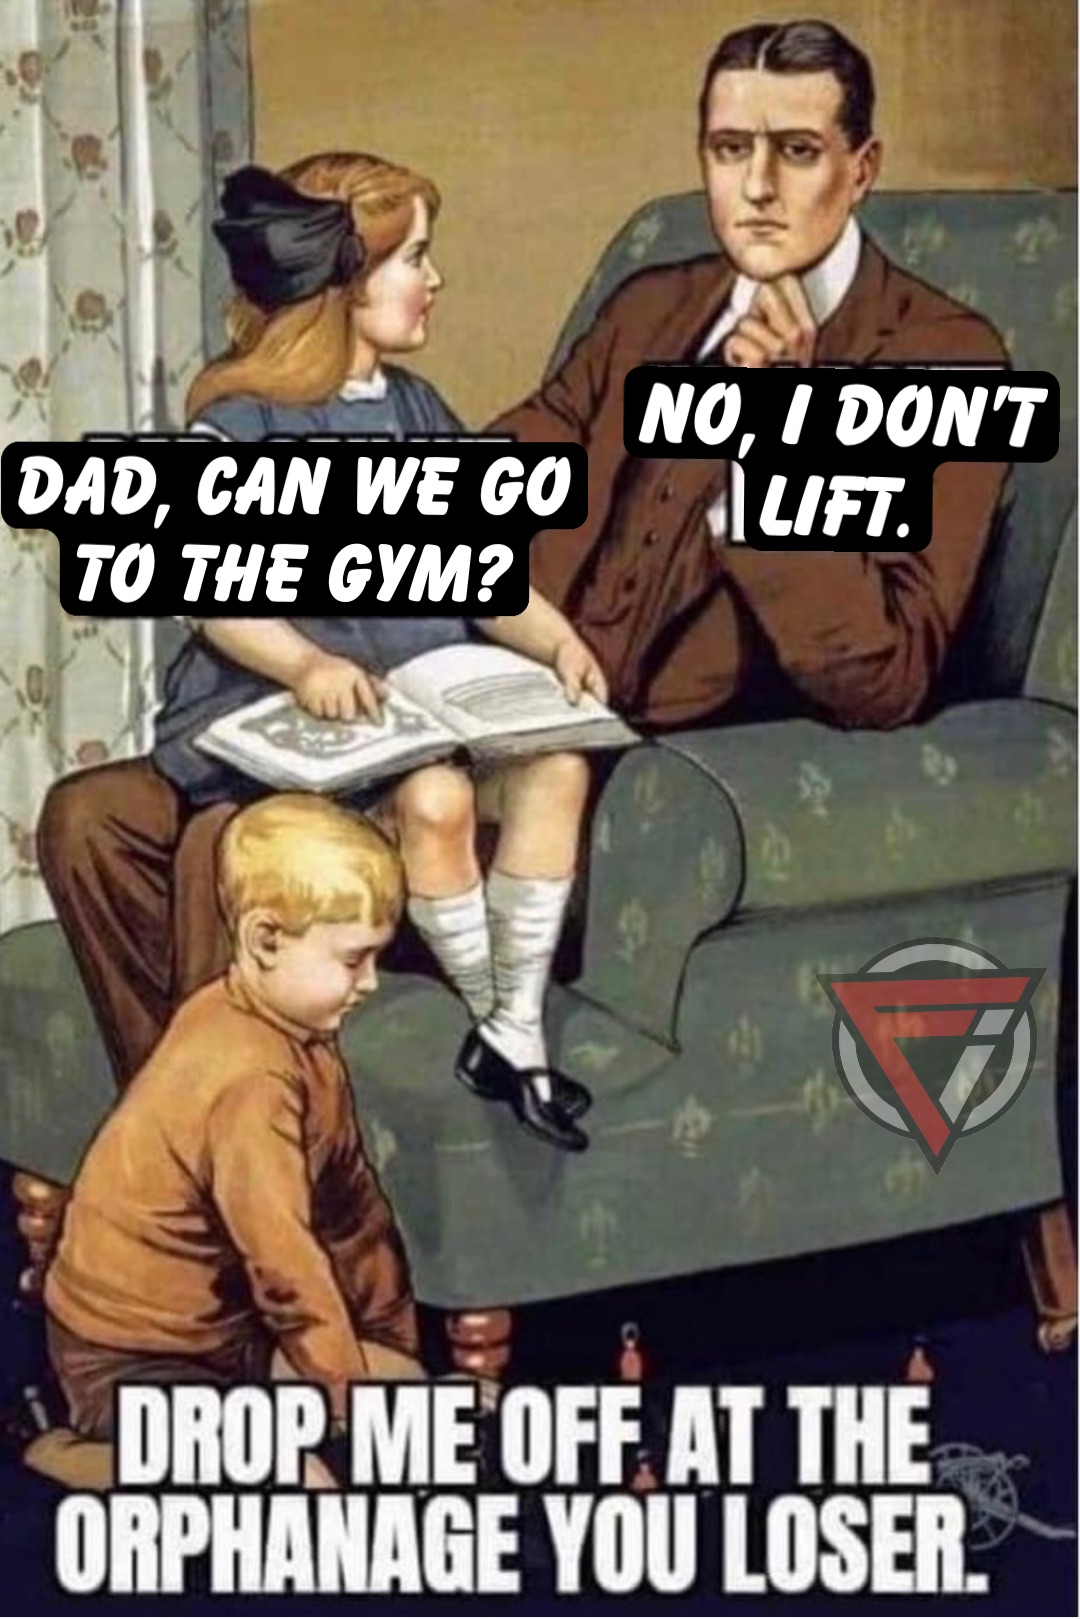 Dad, can we go 
To the gym? No, I don’t lift.